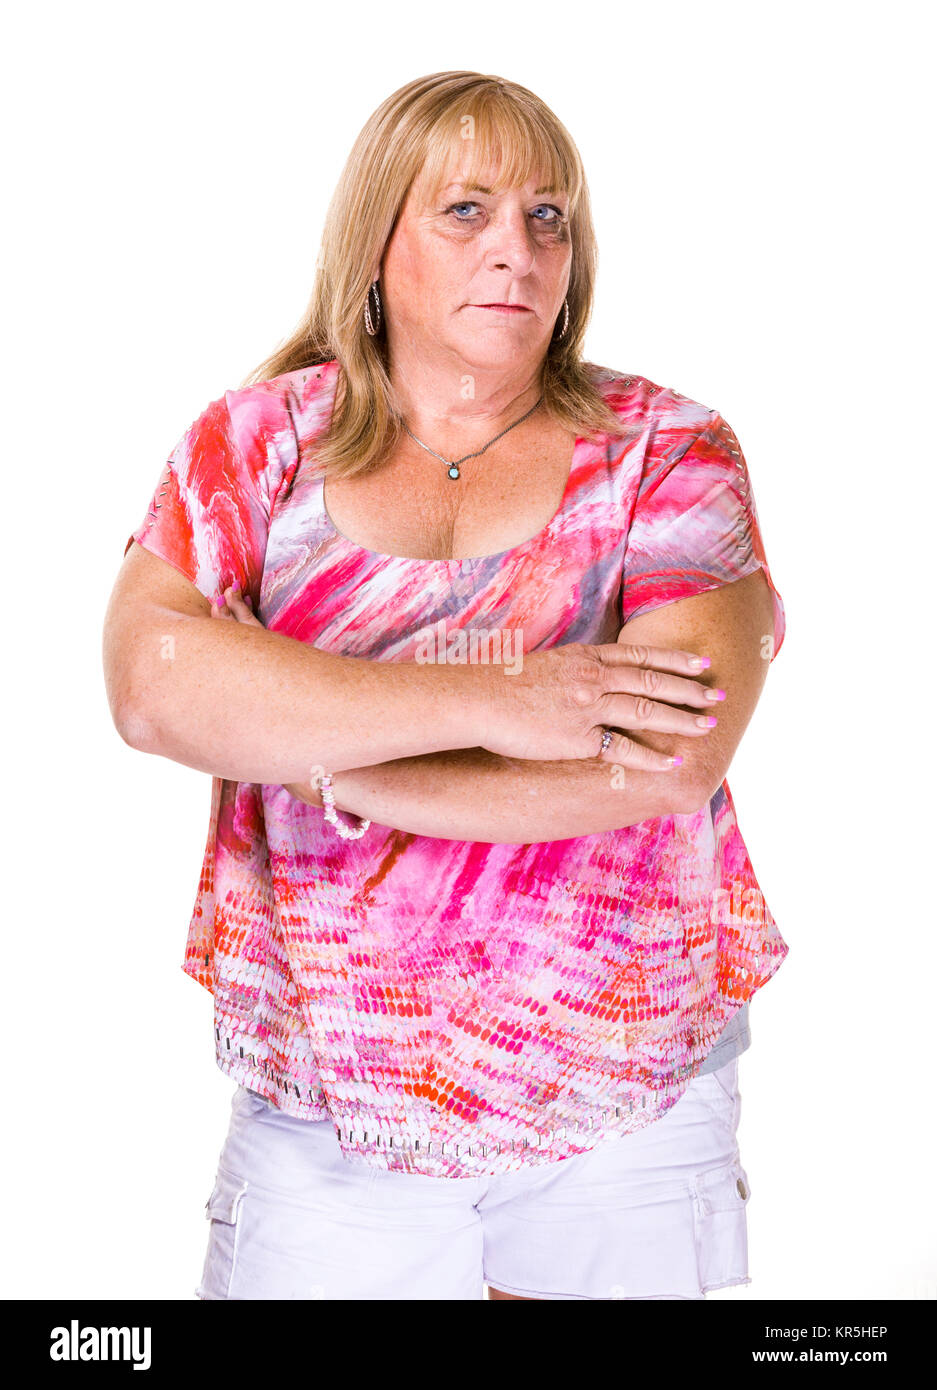 Skeptical or Angry Mature Transgender Woman Stock Photo